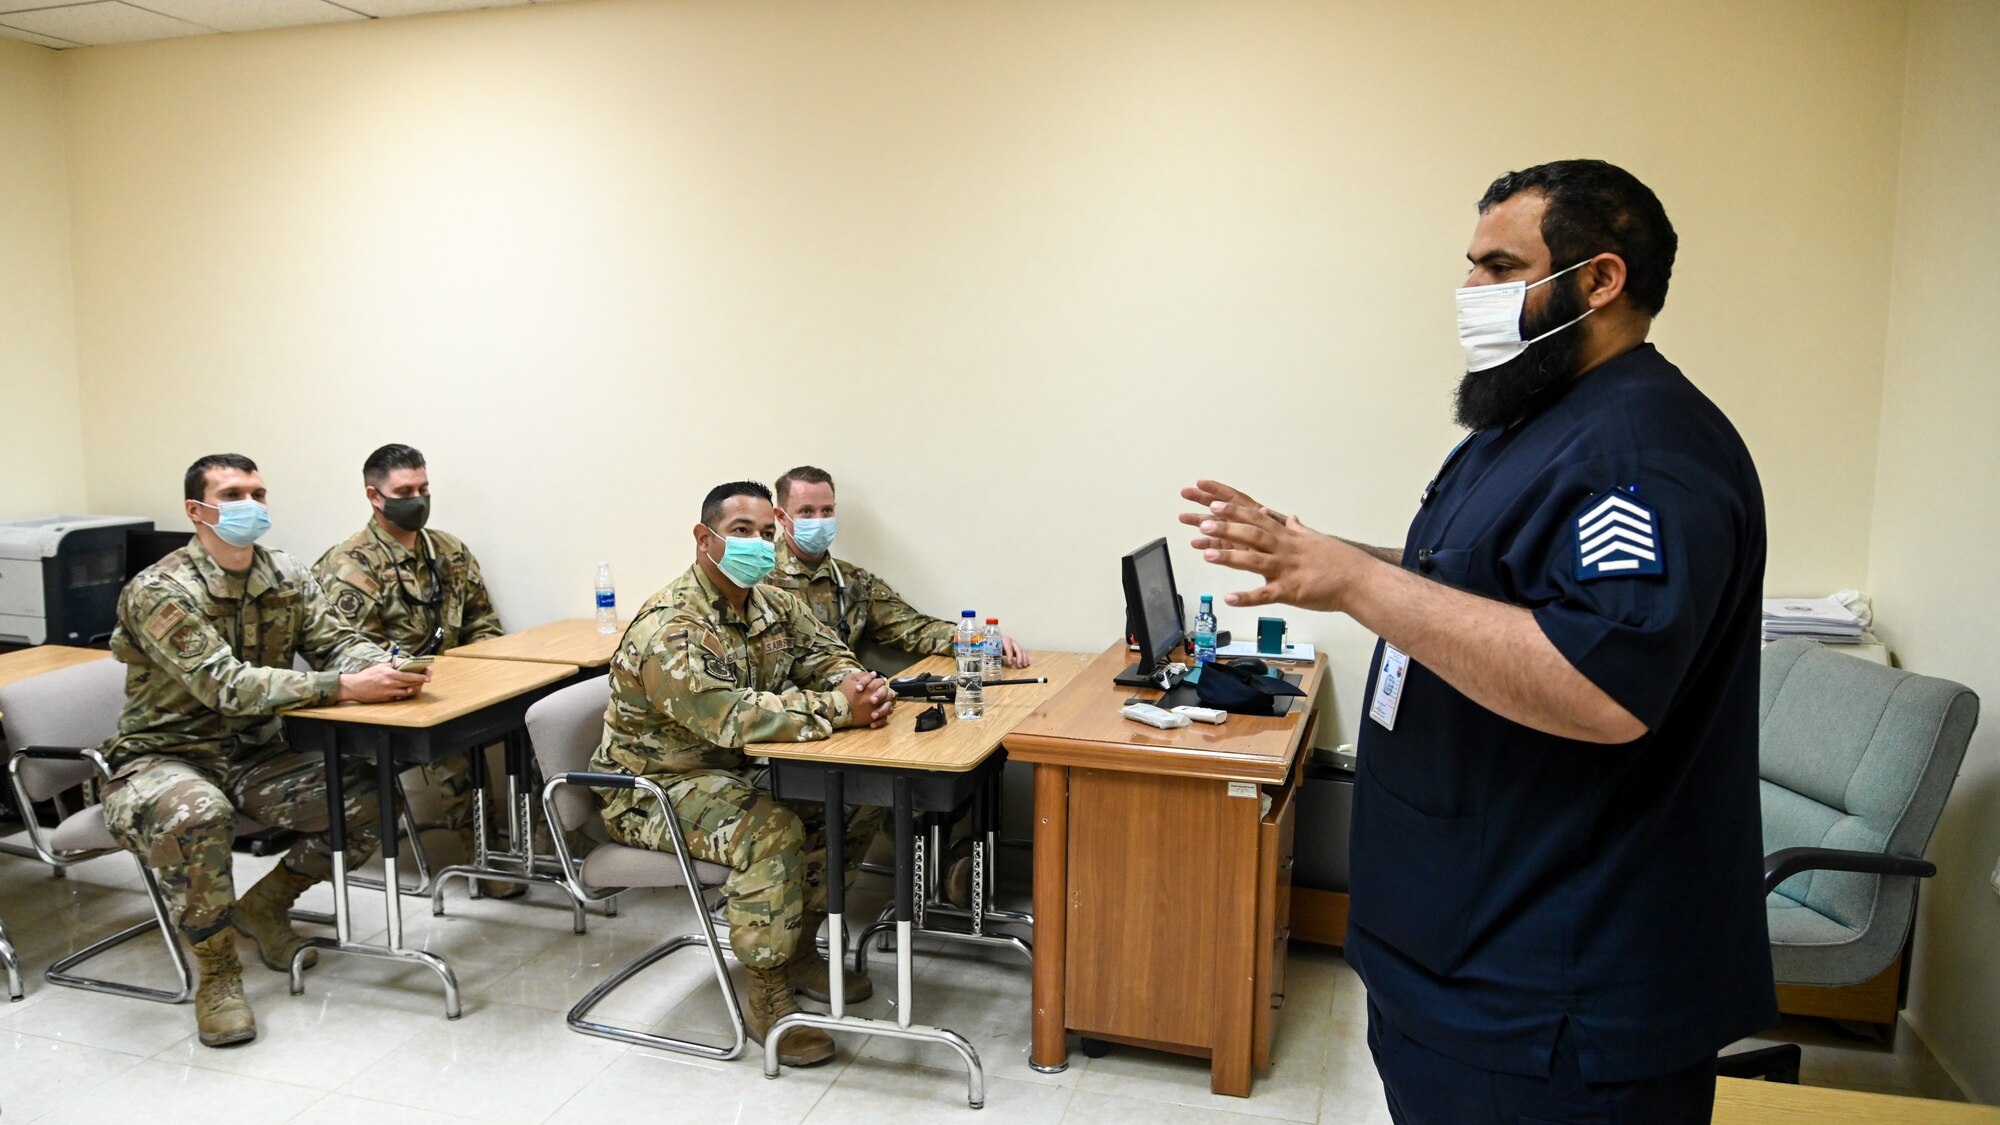 Chief Salem al Shakrh, Royal Saudi Air Force fire chief, briefs members of the 378th Expeditionary Civil Engineer Squadron fire department during an integrated training at Prince Sultan Air Base, Kingdom of Saudi Arabia, Nov. 24, 2021. The briefing allowed members of the 378 ECES to gain a better understanding of the operational structure and capabilities of the RSAF fire department. (U.S. Air Force photo by Staff Sgt. Christina Graves)